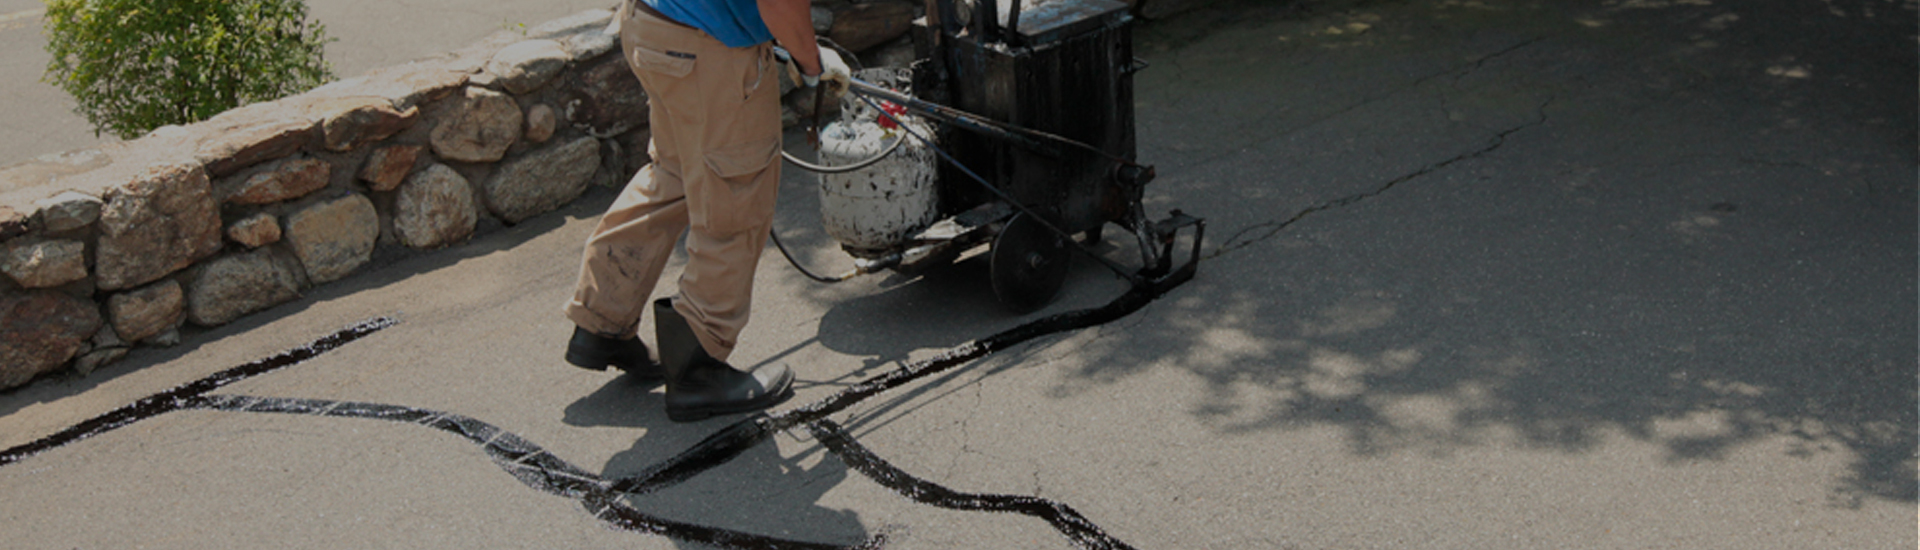 Cracks are repaired using hot, liquified rubber